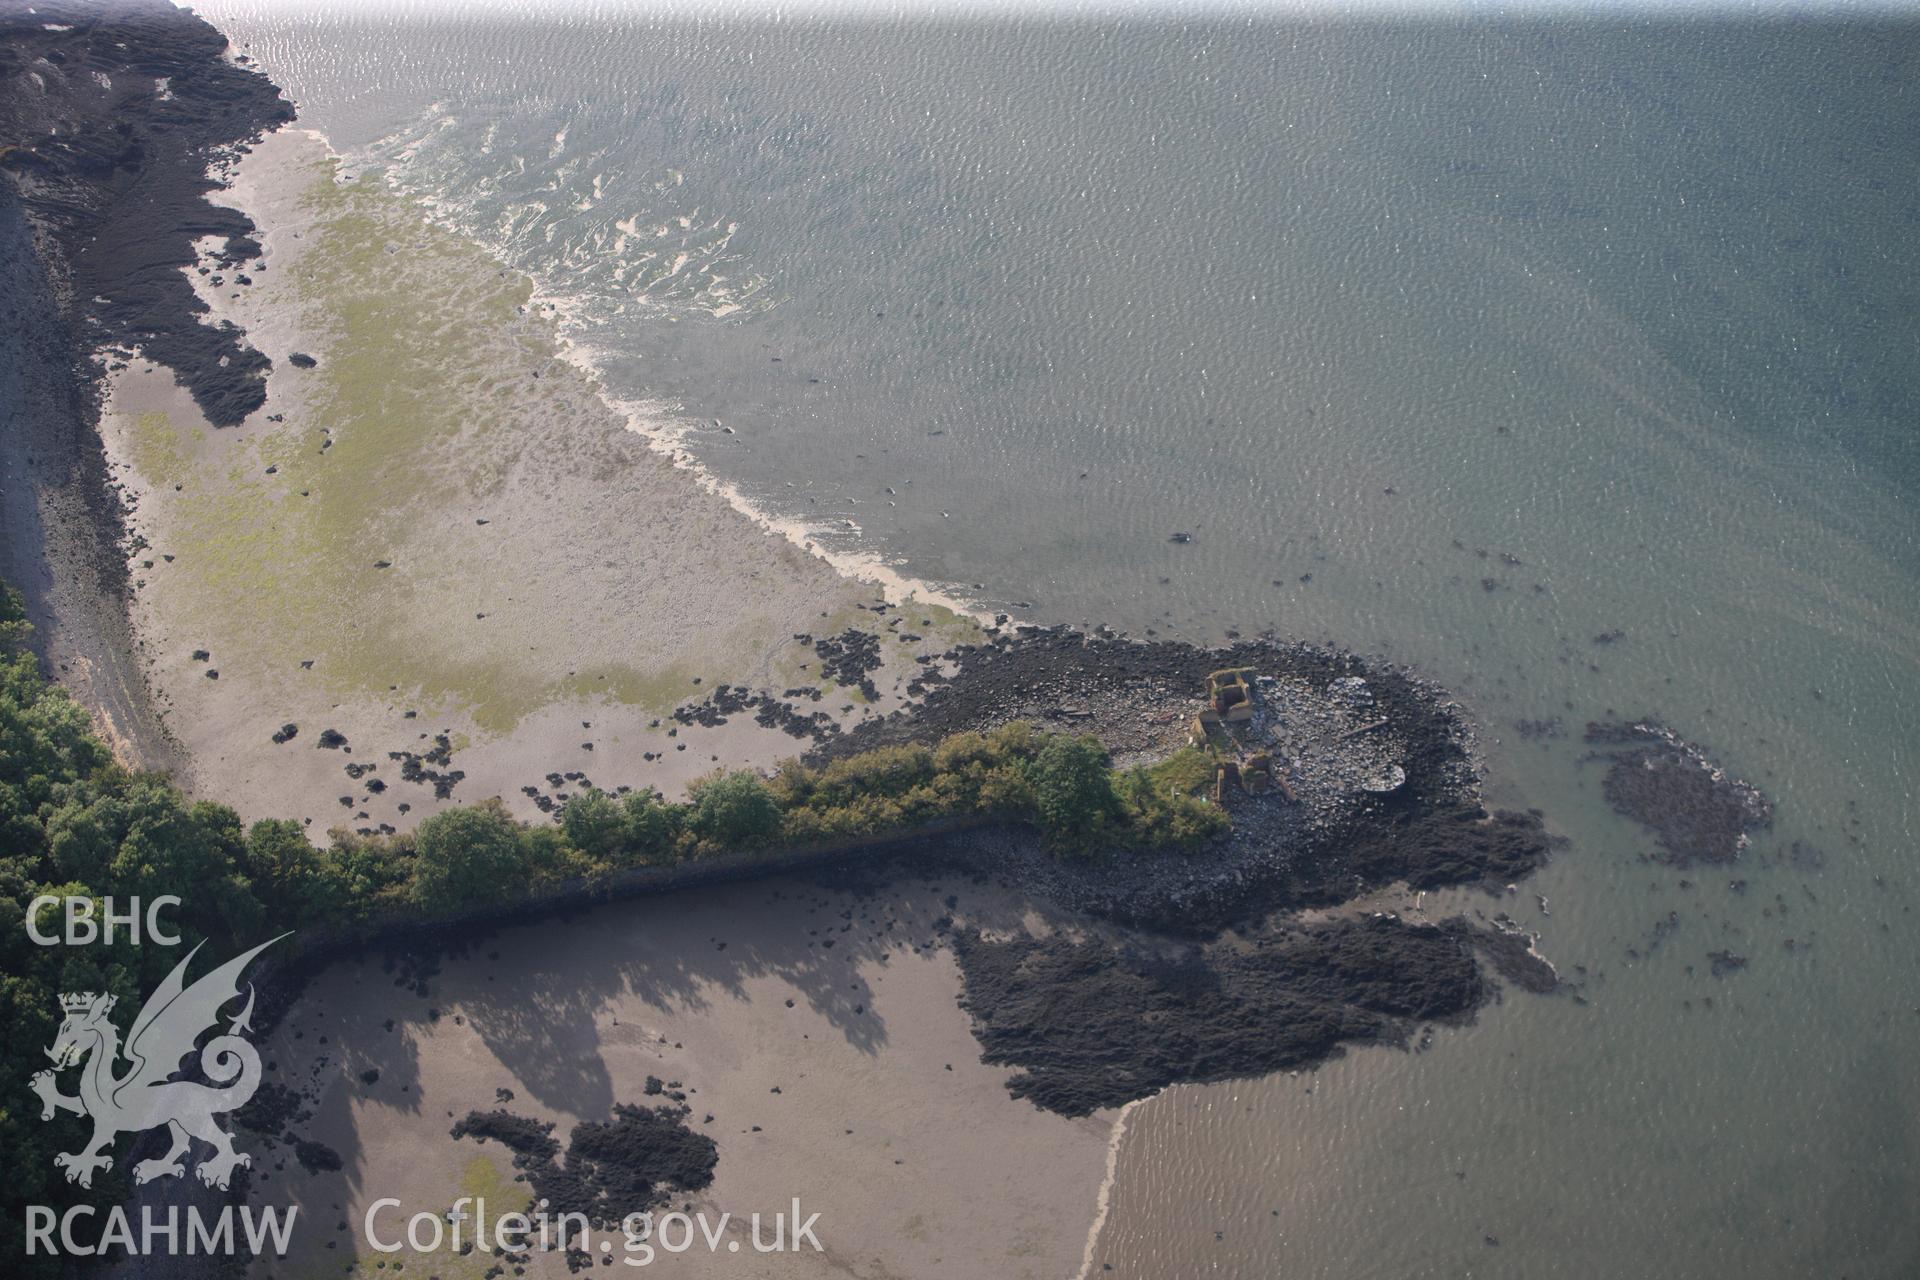 RCAHMW colour oblique photograph of Bath house and jetty, Penrhyn estate. Taken by Toby Driver and Oliver Davies on 27/07/2011.